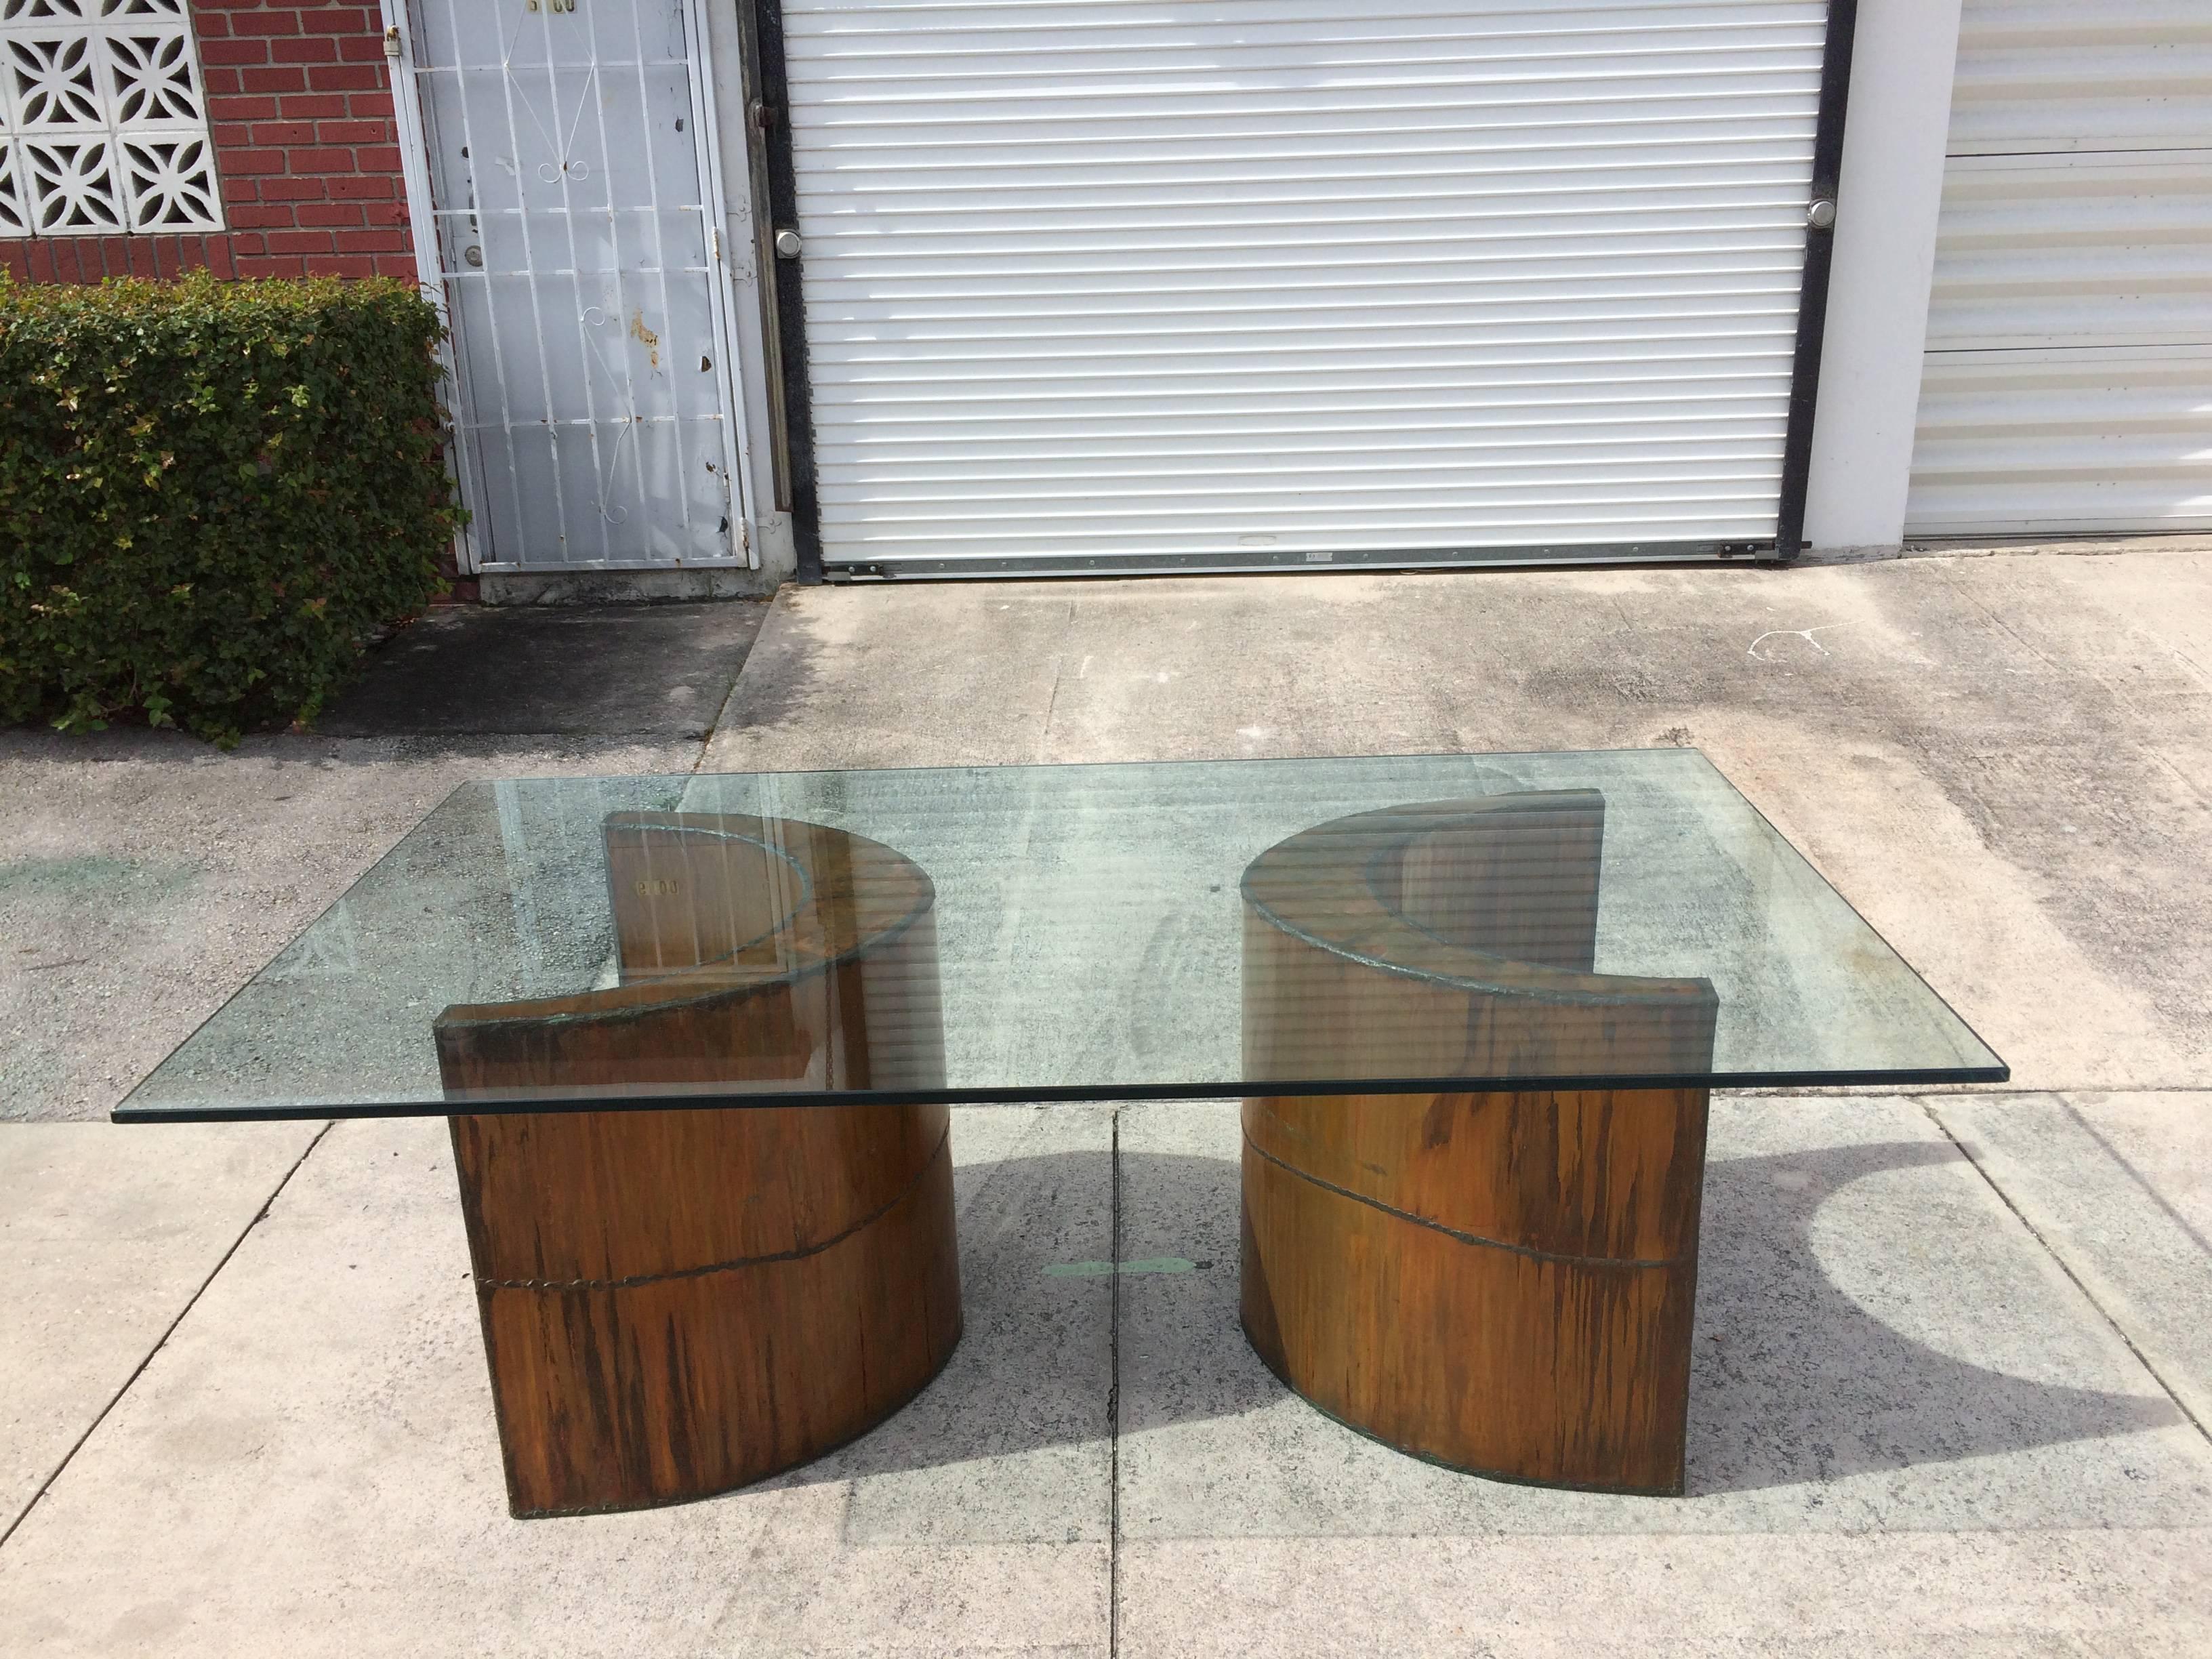 Two crescent shaped welded copper pedestal bases. The original glass top measure is 84